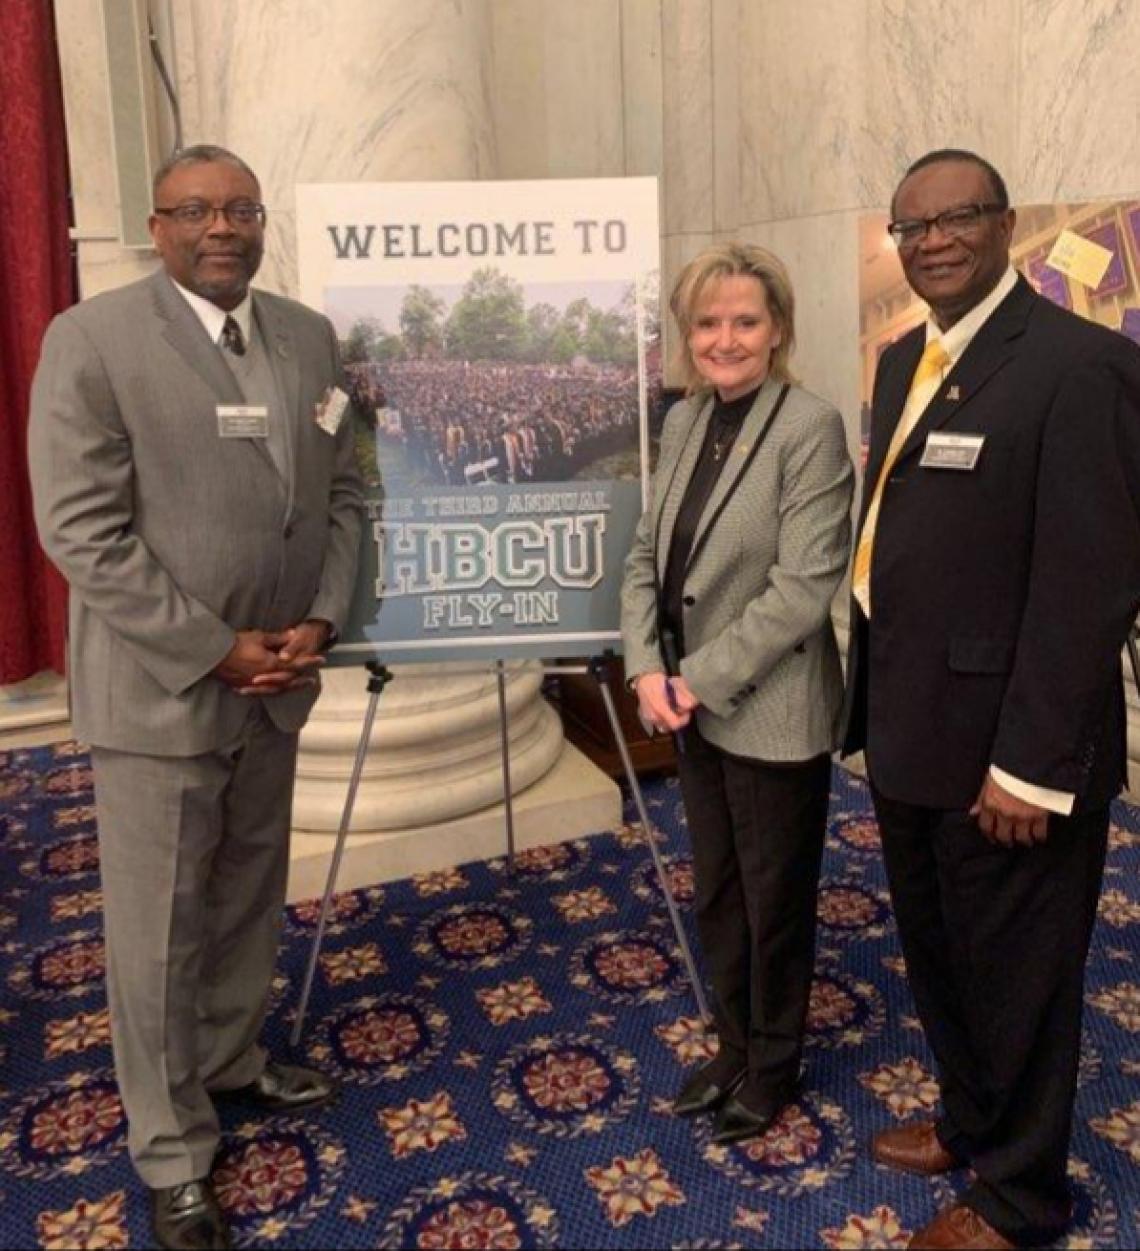 Senator Hyde-Smith speaks at the HBCU “Fly In” and visits with Alcorn State University Interim President Dr. Donzell Lee and Mississippi Valley State University President Dr. Jerryl Briggs